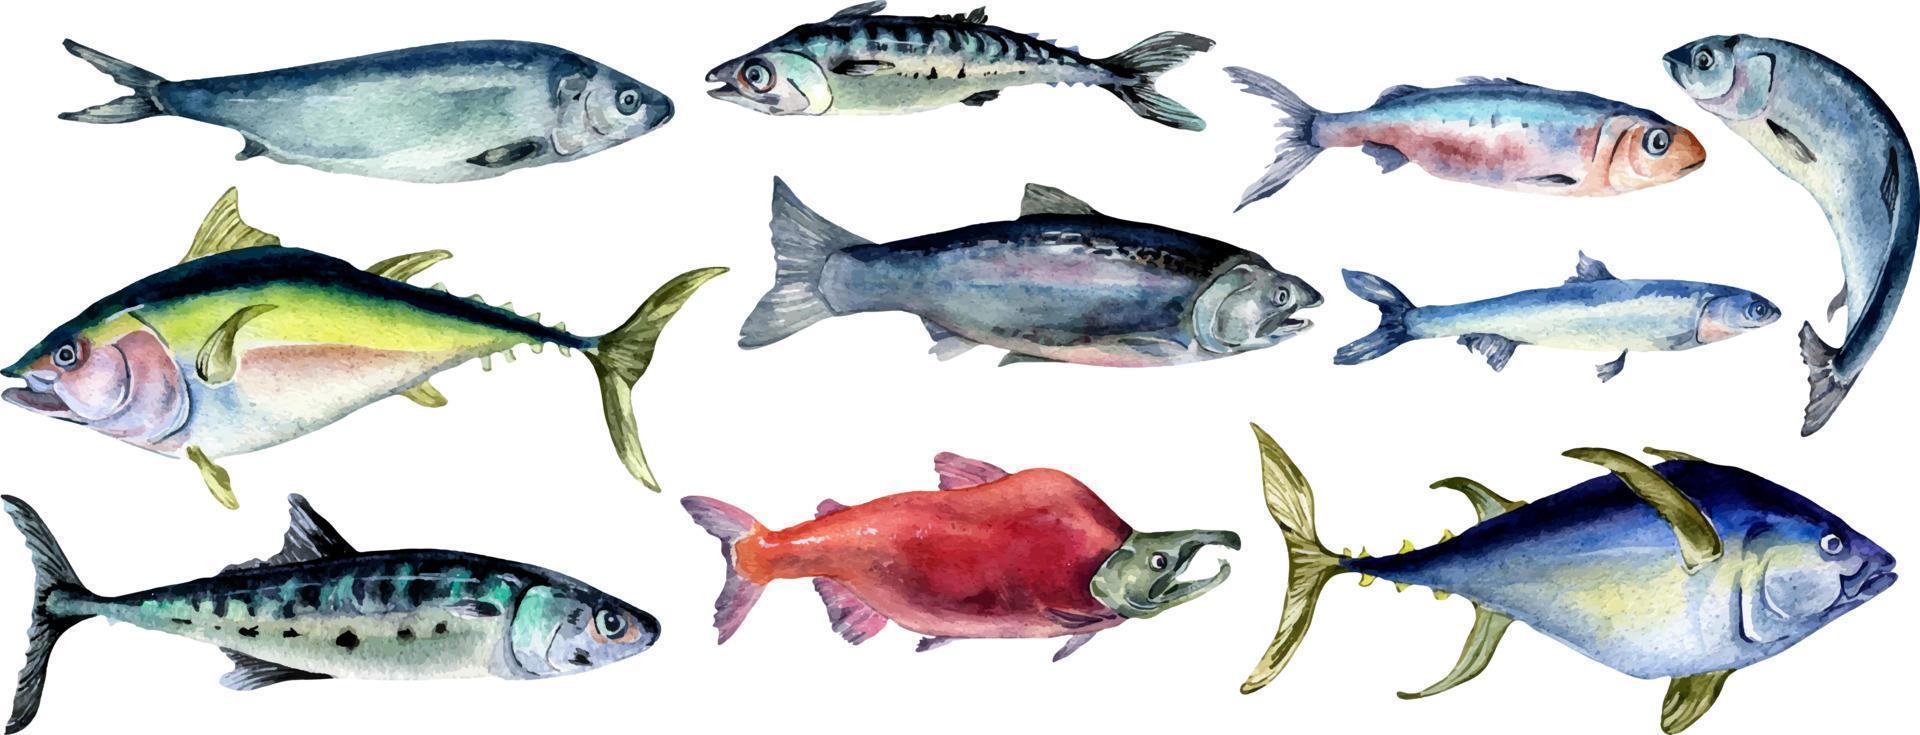 Set of wild sea fish watercolor illustration isolated on white background. vector